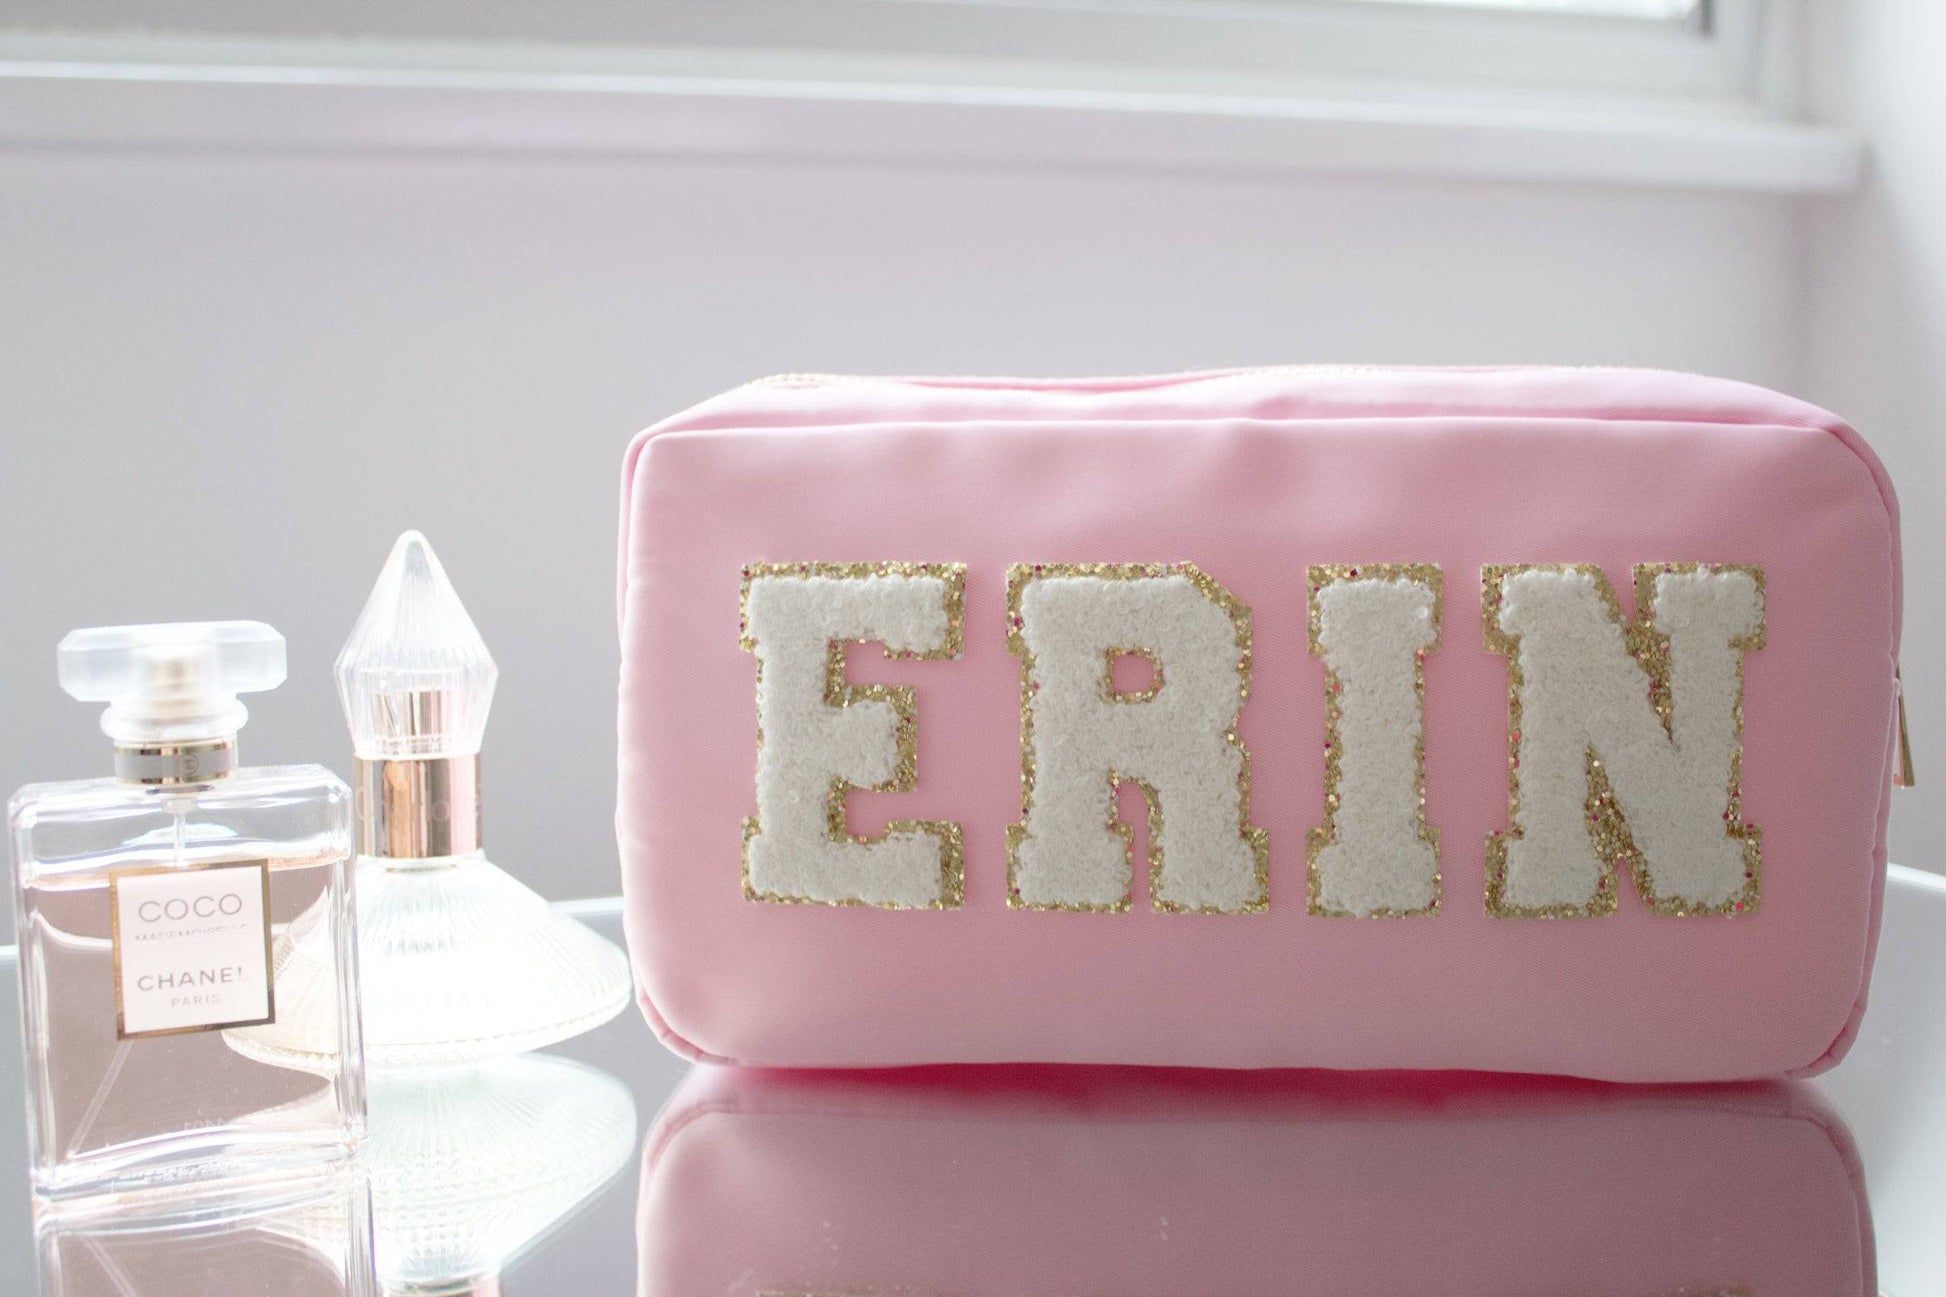 Wedding Bridal Party Personalised Make-Up Cosmetics Bags - MYLEE London